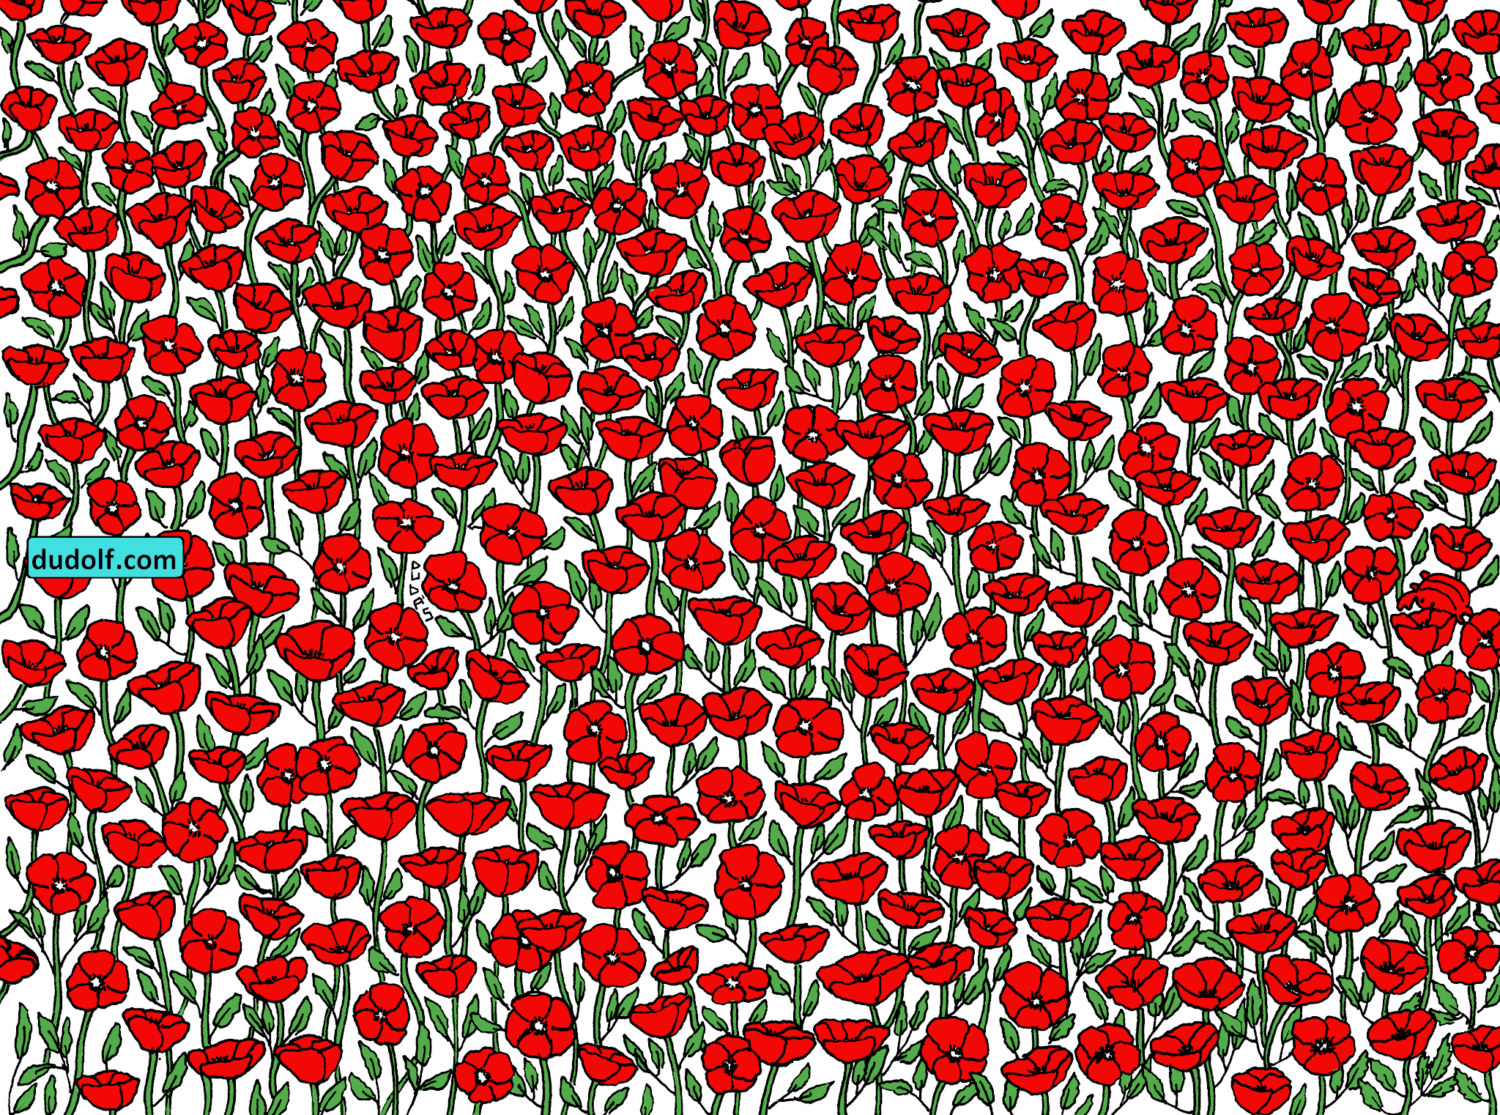 Find crab in poppies puzzle